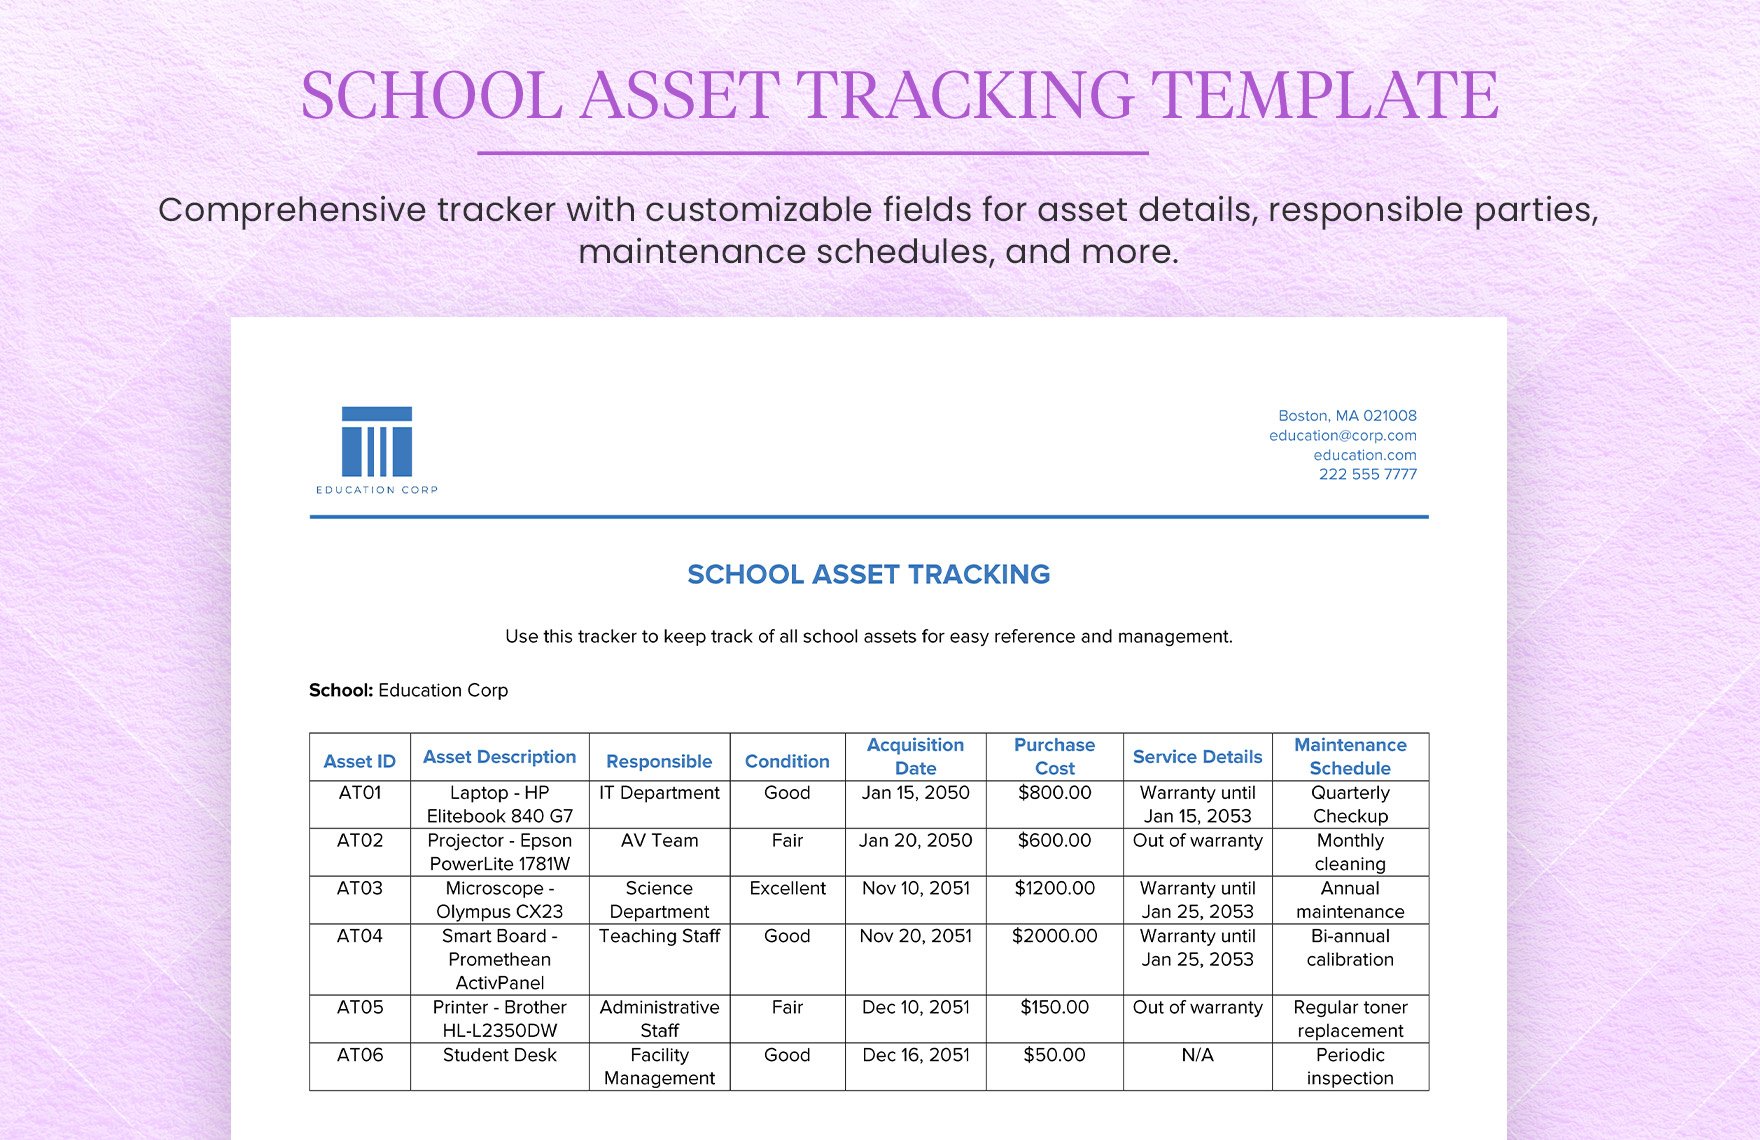 School Asset Tracking Template in Word, Google Docs, PDF